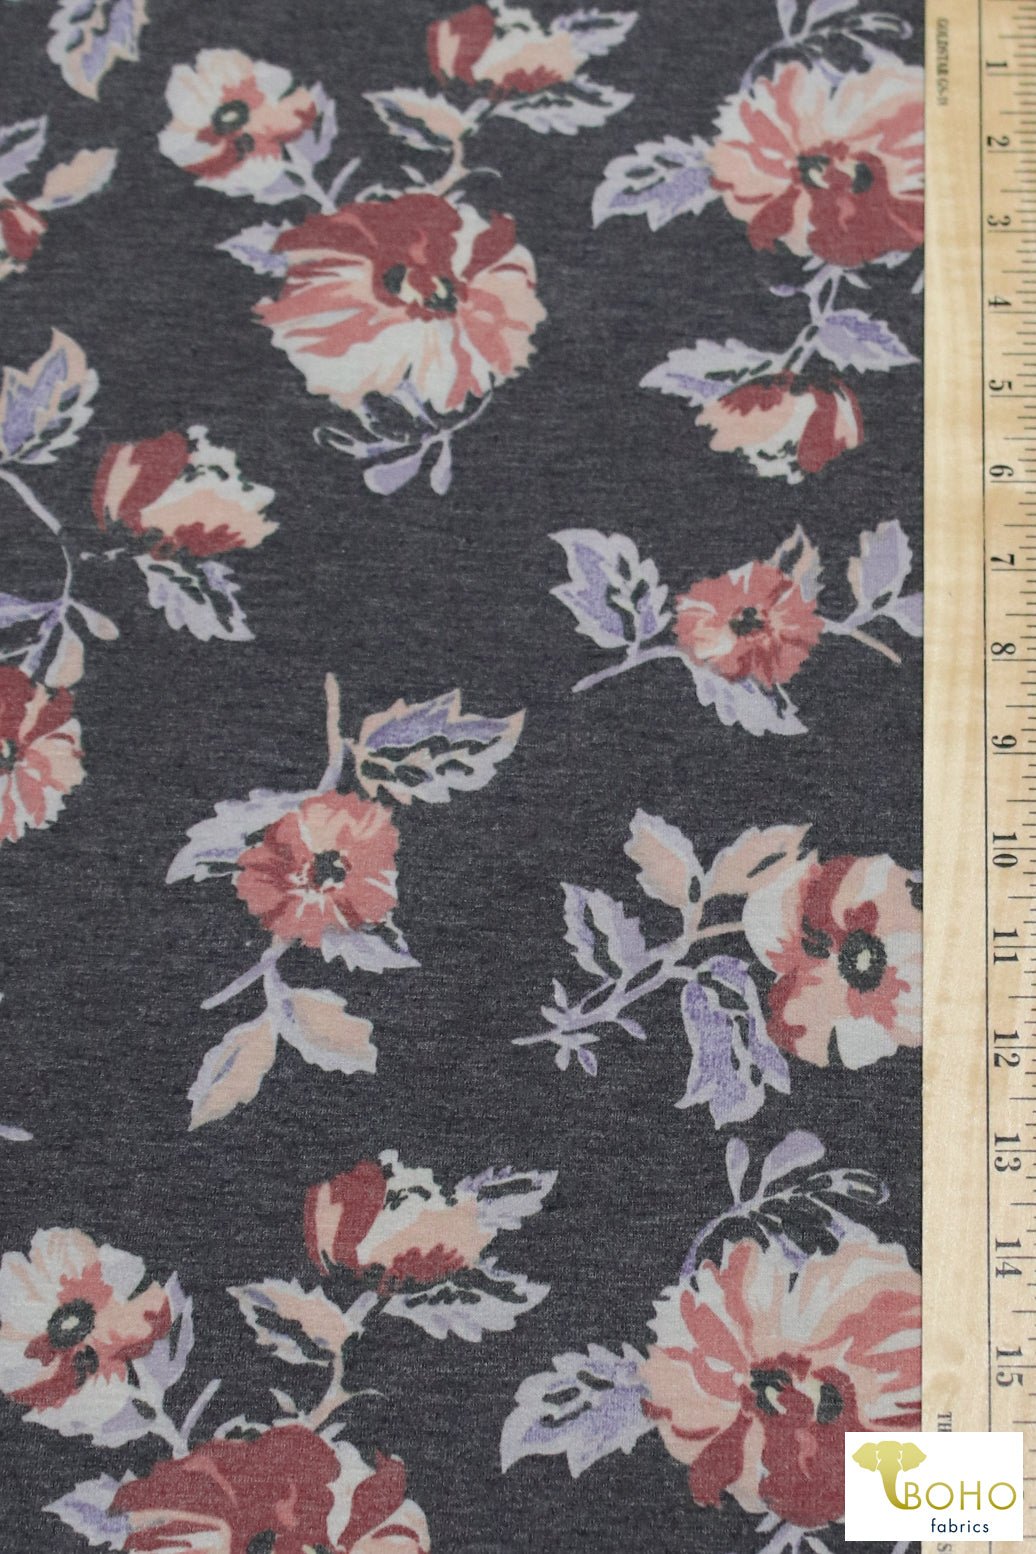 Dusty Rose Cosmos on Gray, French Terry Knit Print. FTP-330-GRY - Boho Fabrics